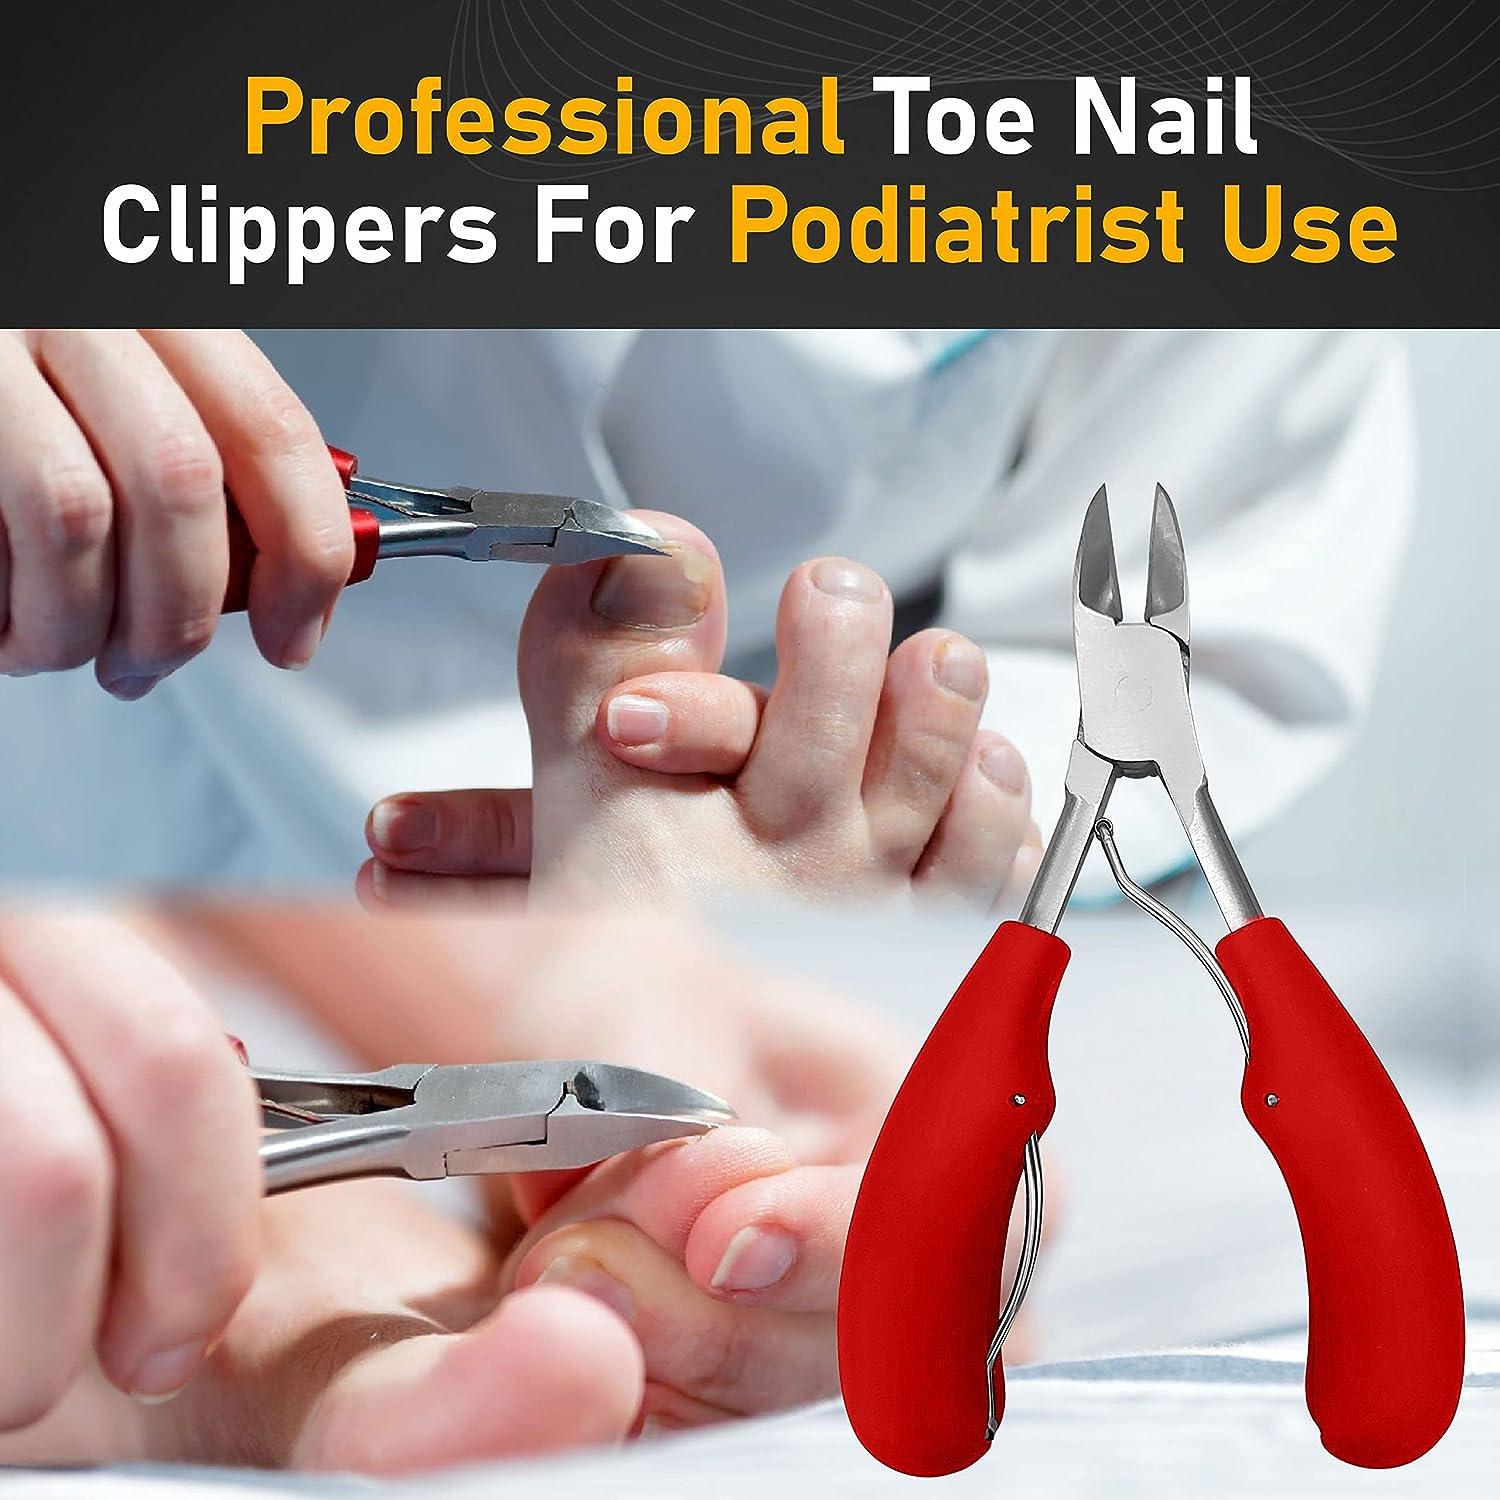 EZ Grip Side-Cut Toenail Clippers with Extended Reach